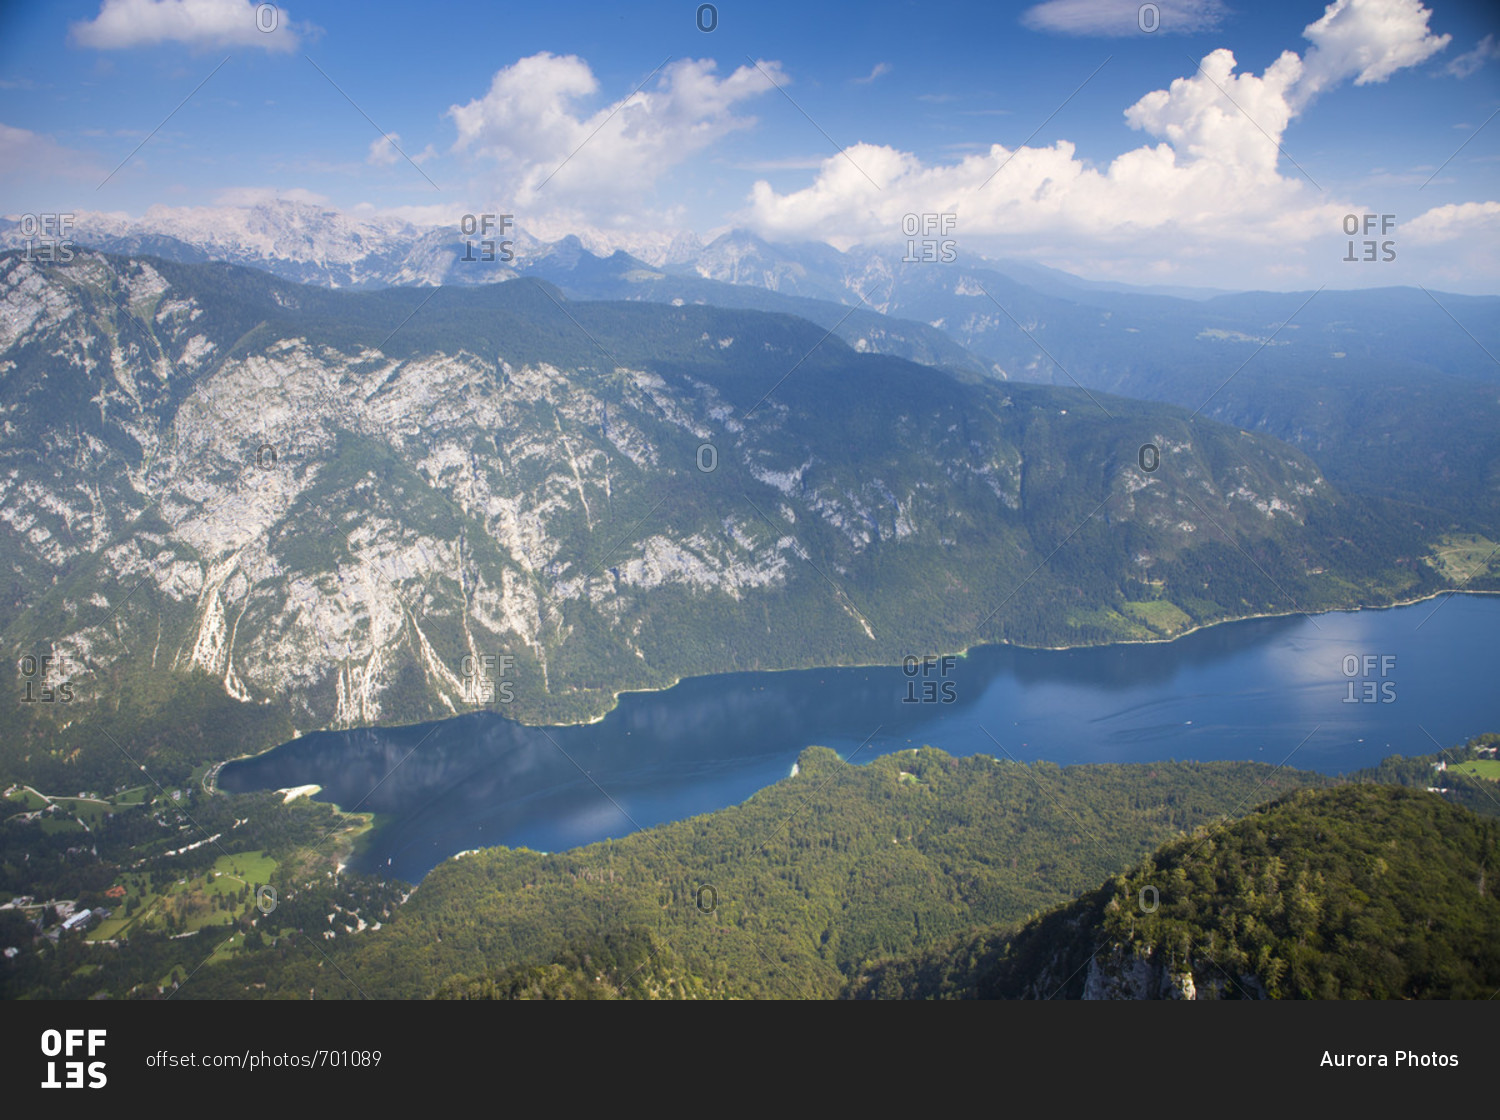 Lake Bohinj as seen from mount Vogel, largest permanent lake located in Bohinj Valley of Julian Alps, Triglav National Park, Slovenia